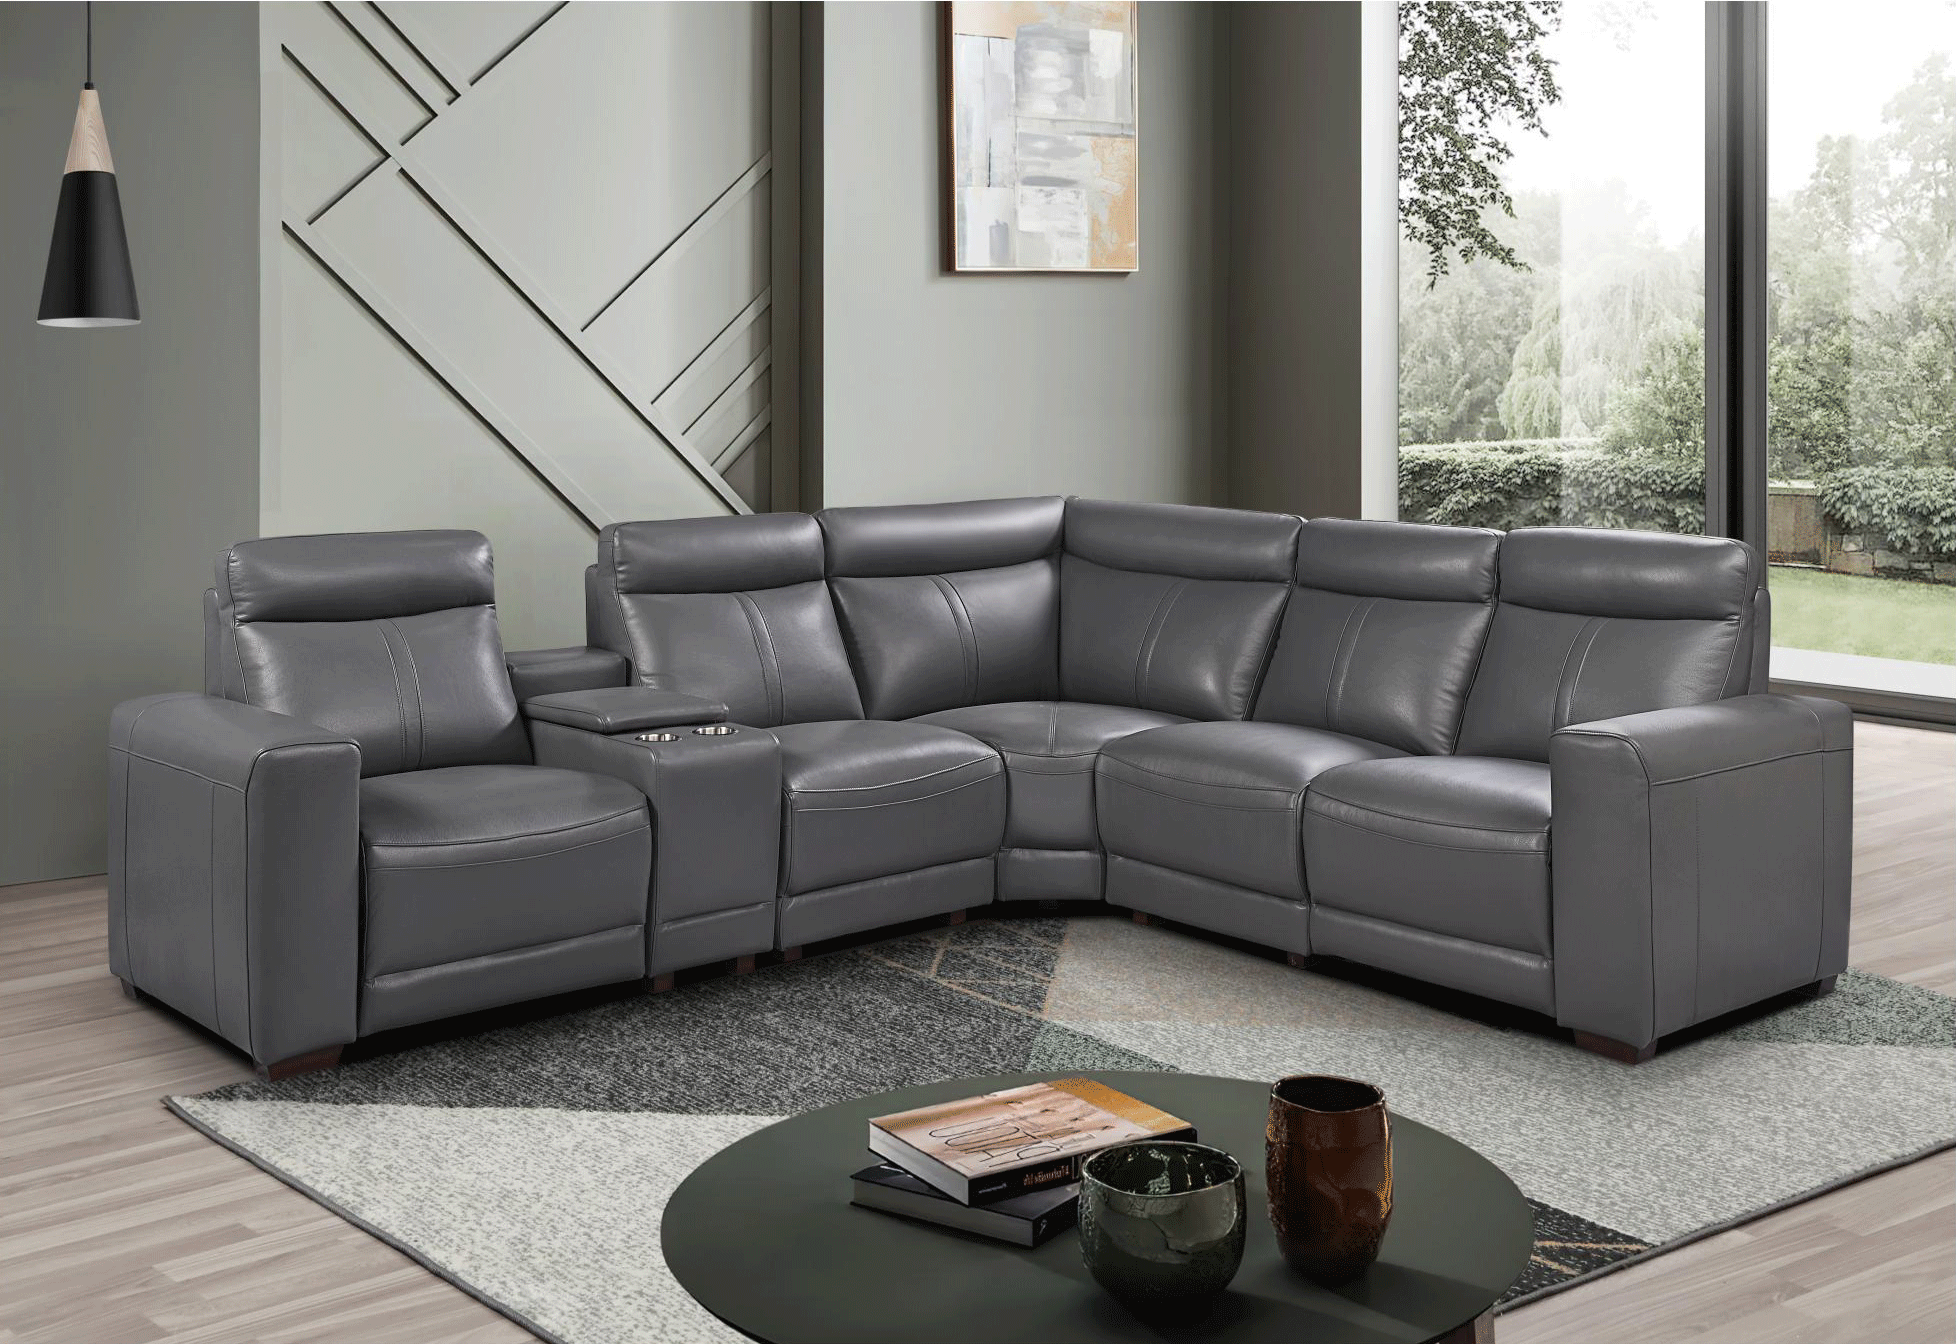 Brands Camel Gold Collection, Italy 2777 Sectional w/ recliners